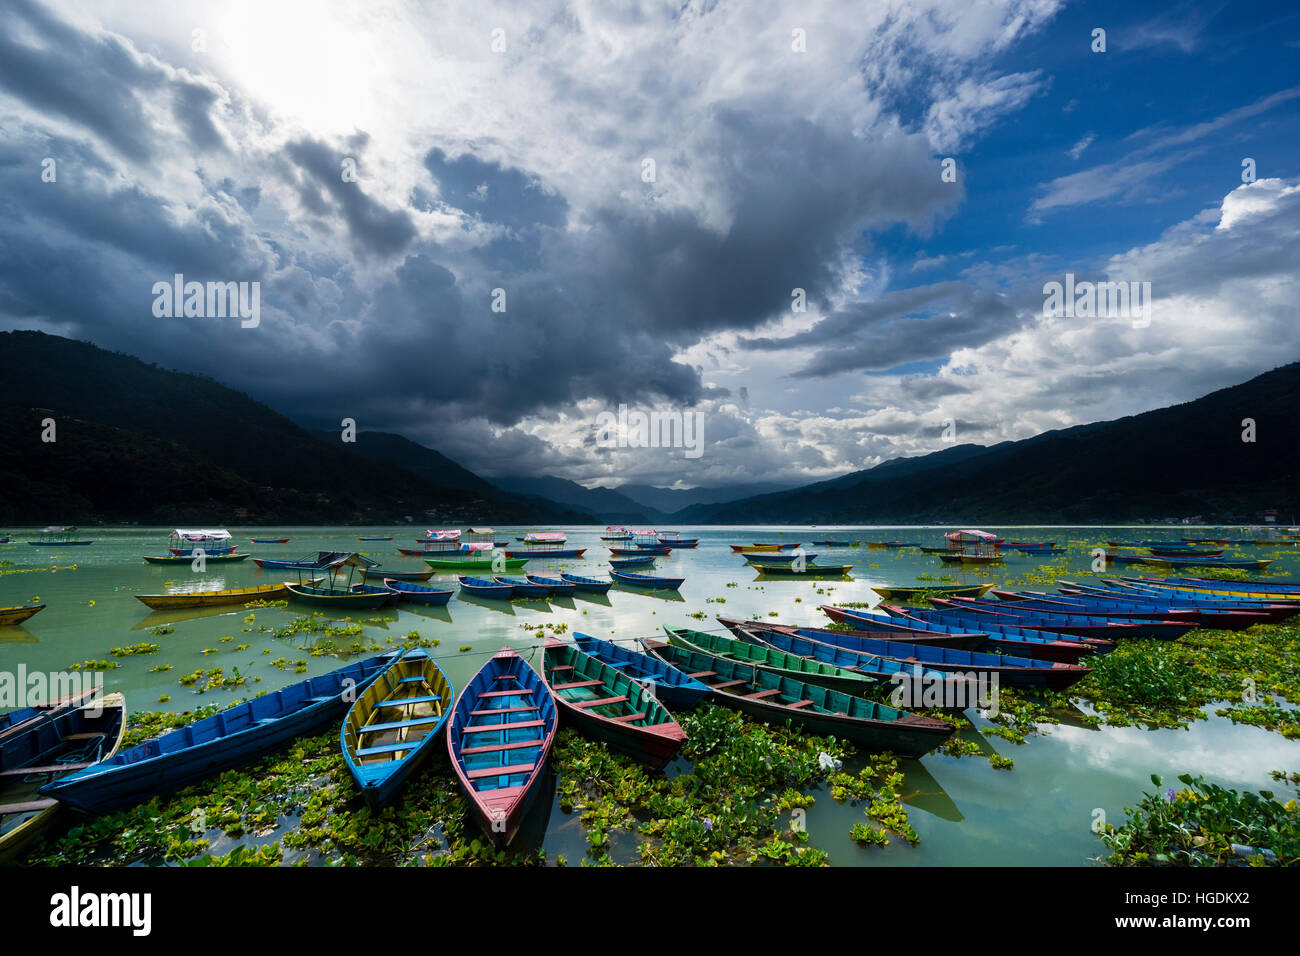 Rowing boats are tight together at Phewa Lake, dark thunderstorm clouds are rising at the sky, Pokhara, Kaski District, Nepal Stock Photo